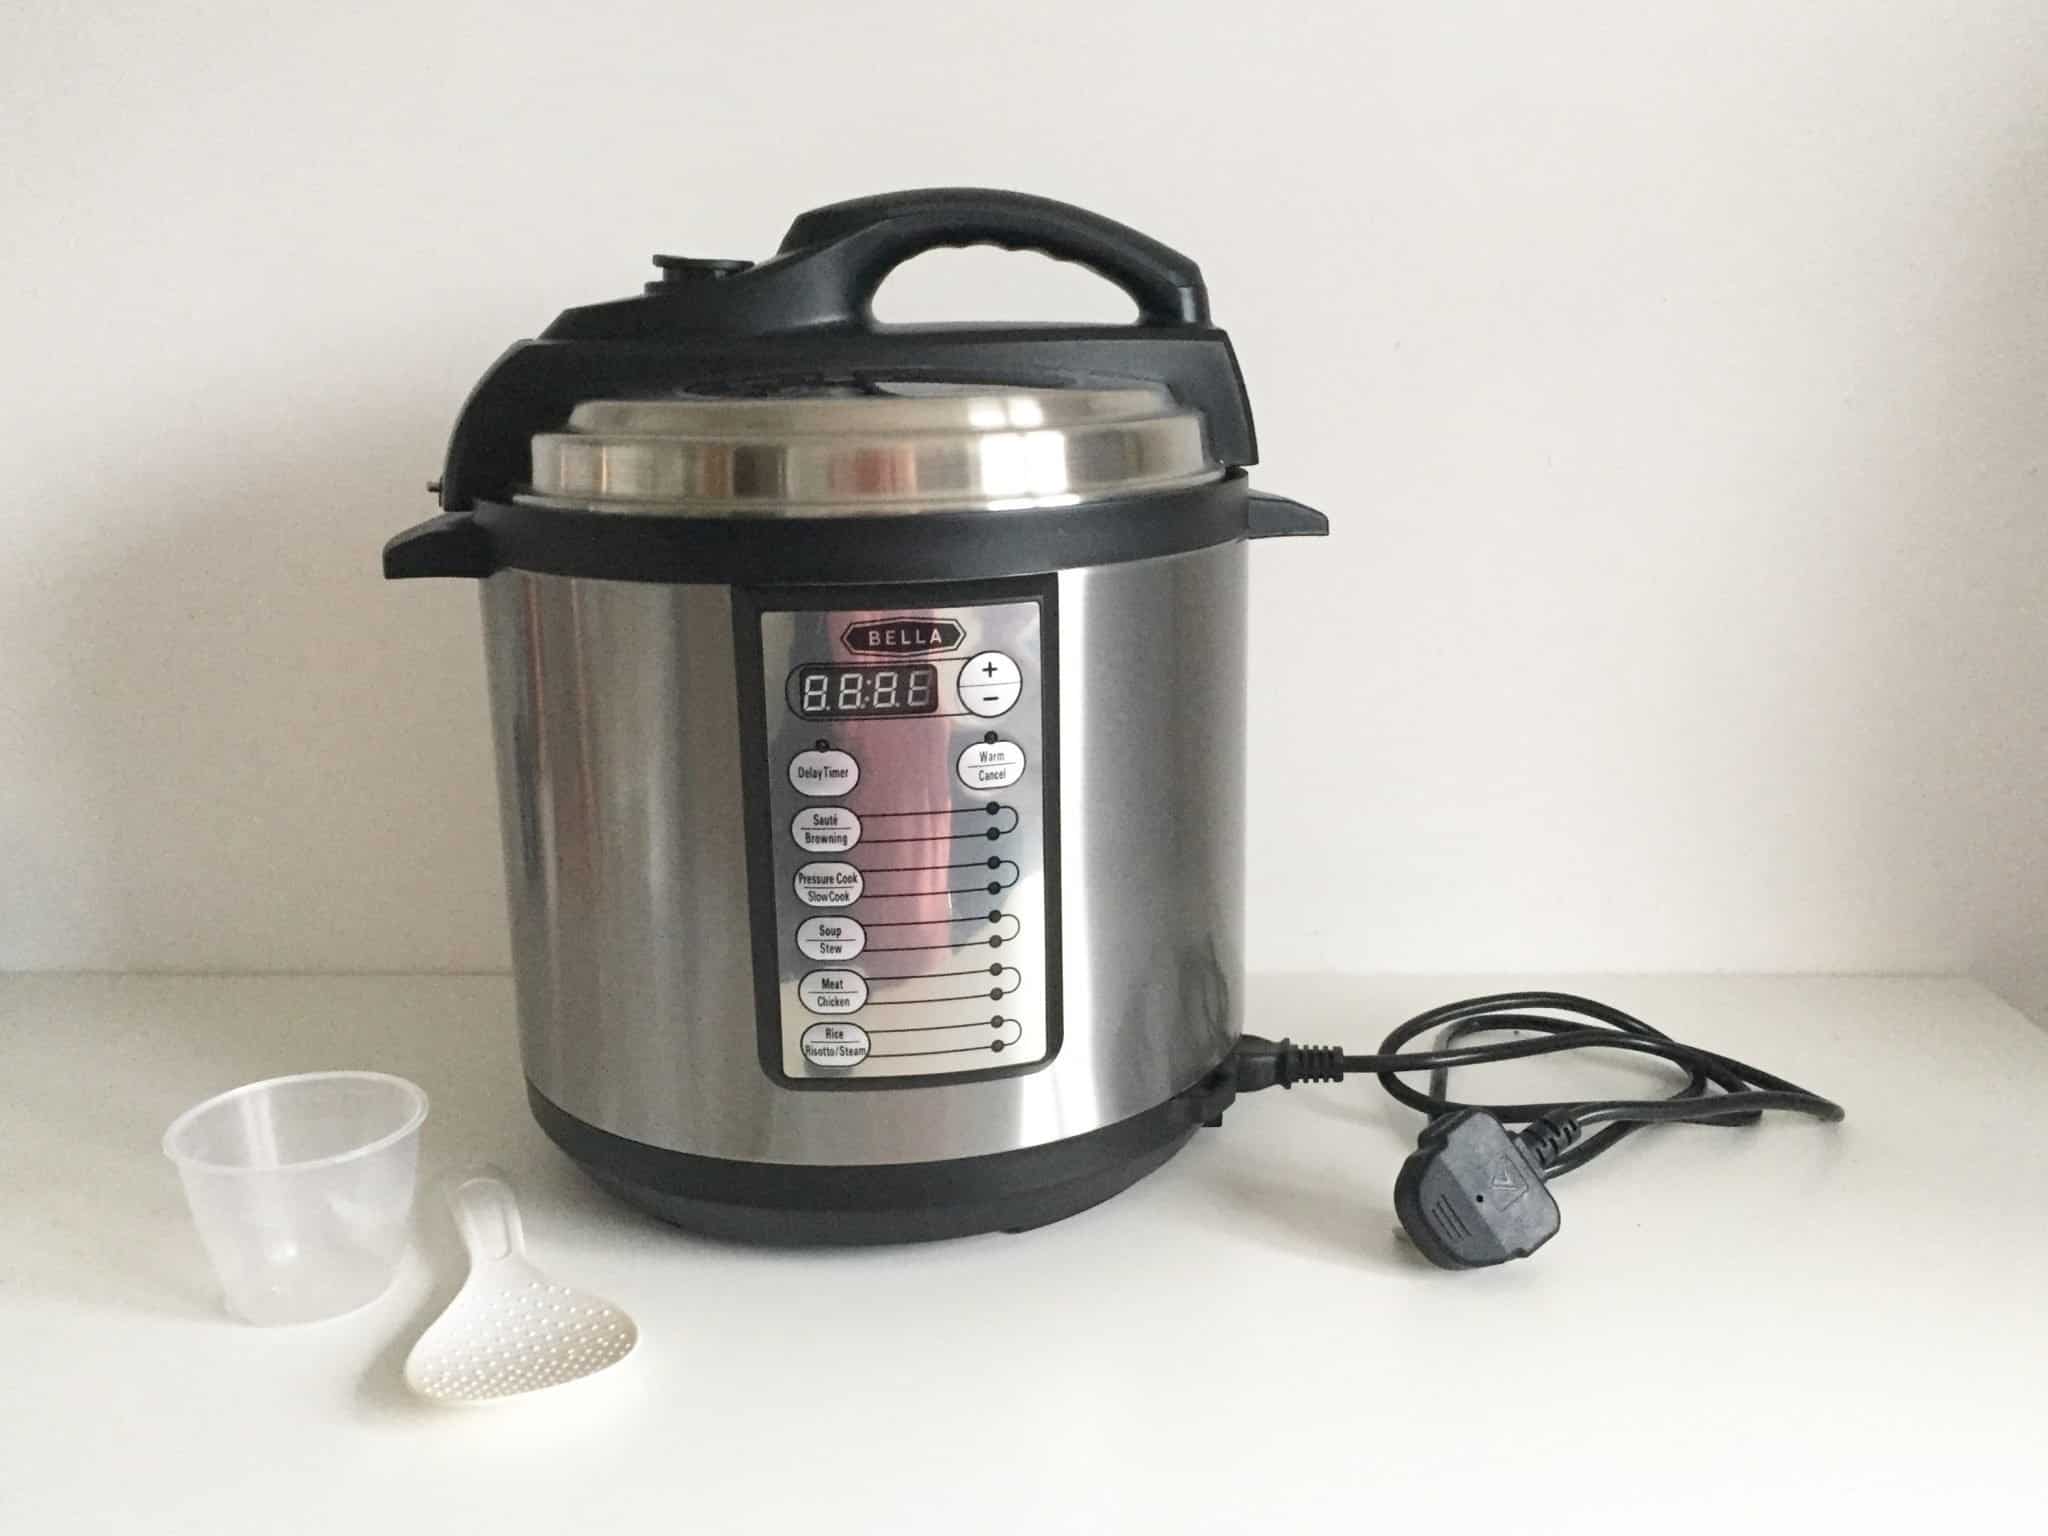 What Is The High Pressure Setting On A Bella Electric Pressure Cooker